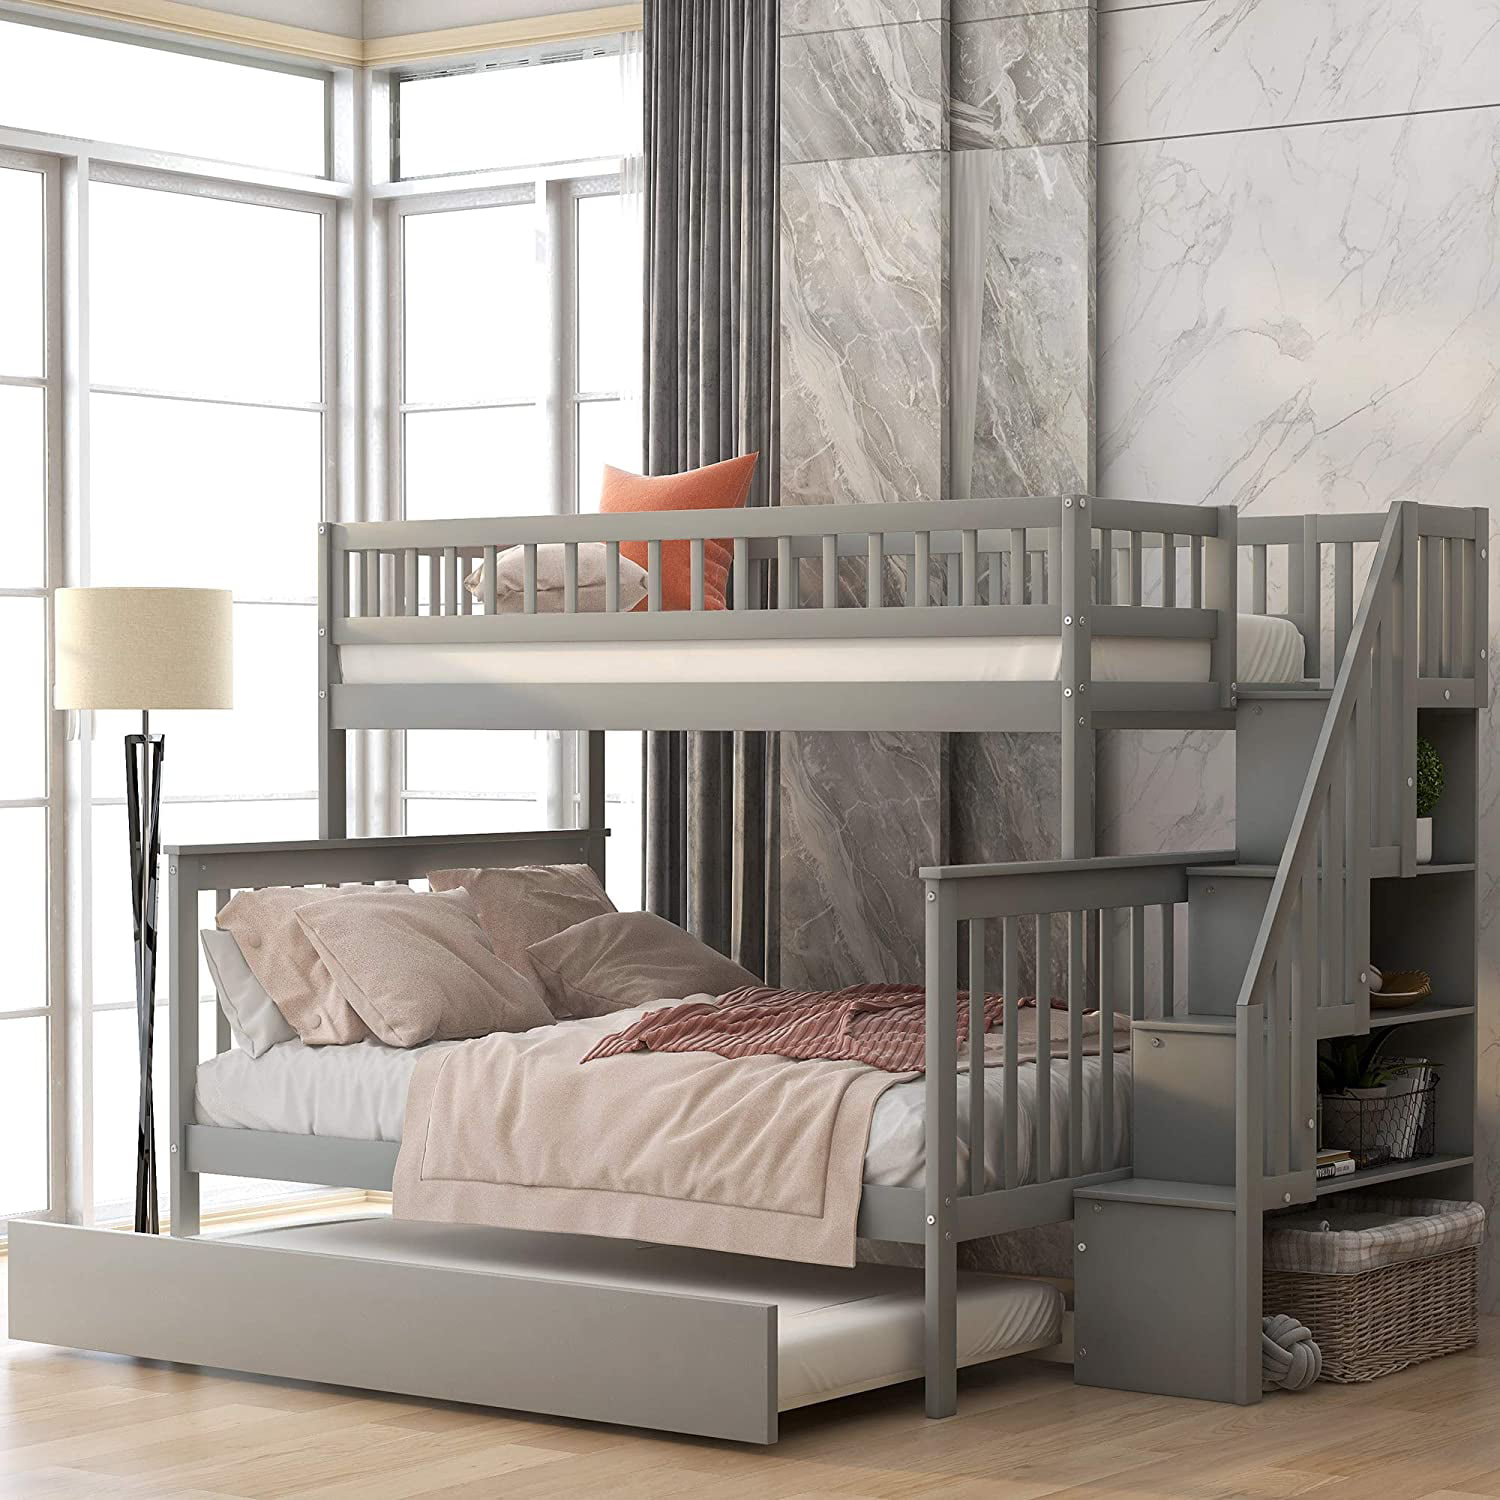 Piscis Bunk Bed Beds Twin Over, Wooden Bunk Beds Twin Over Full With Stairs